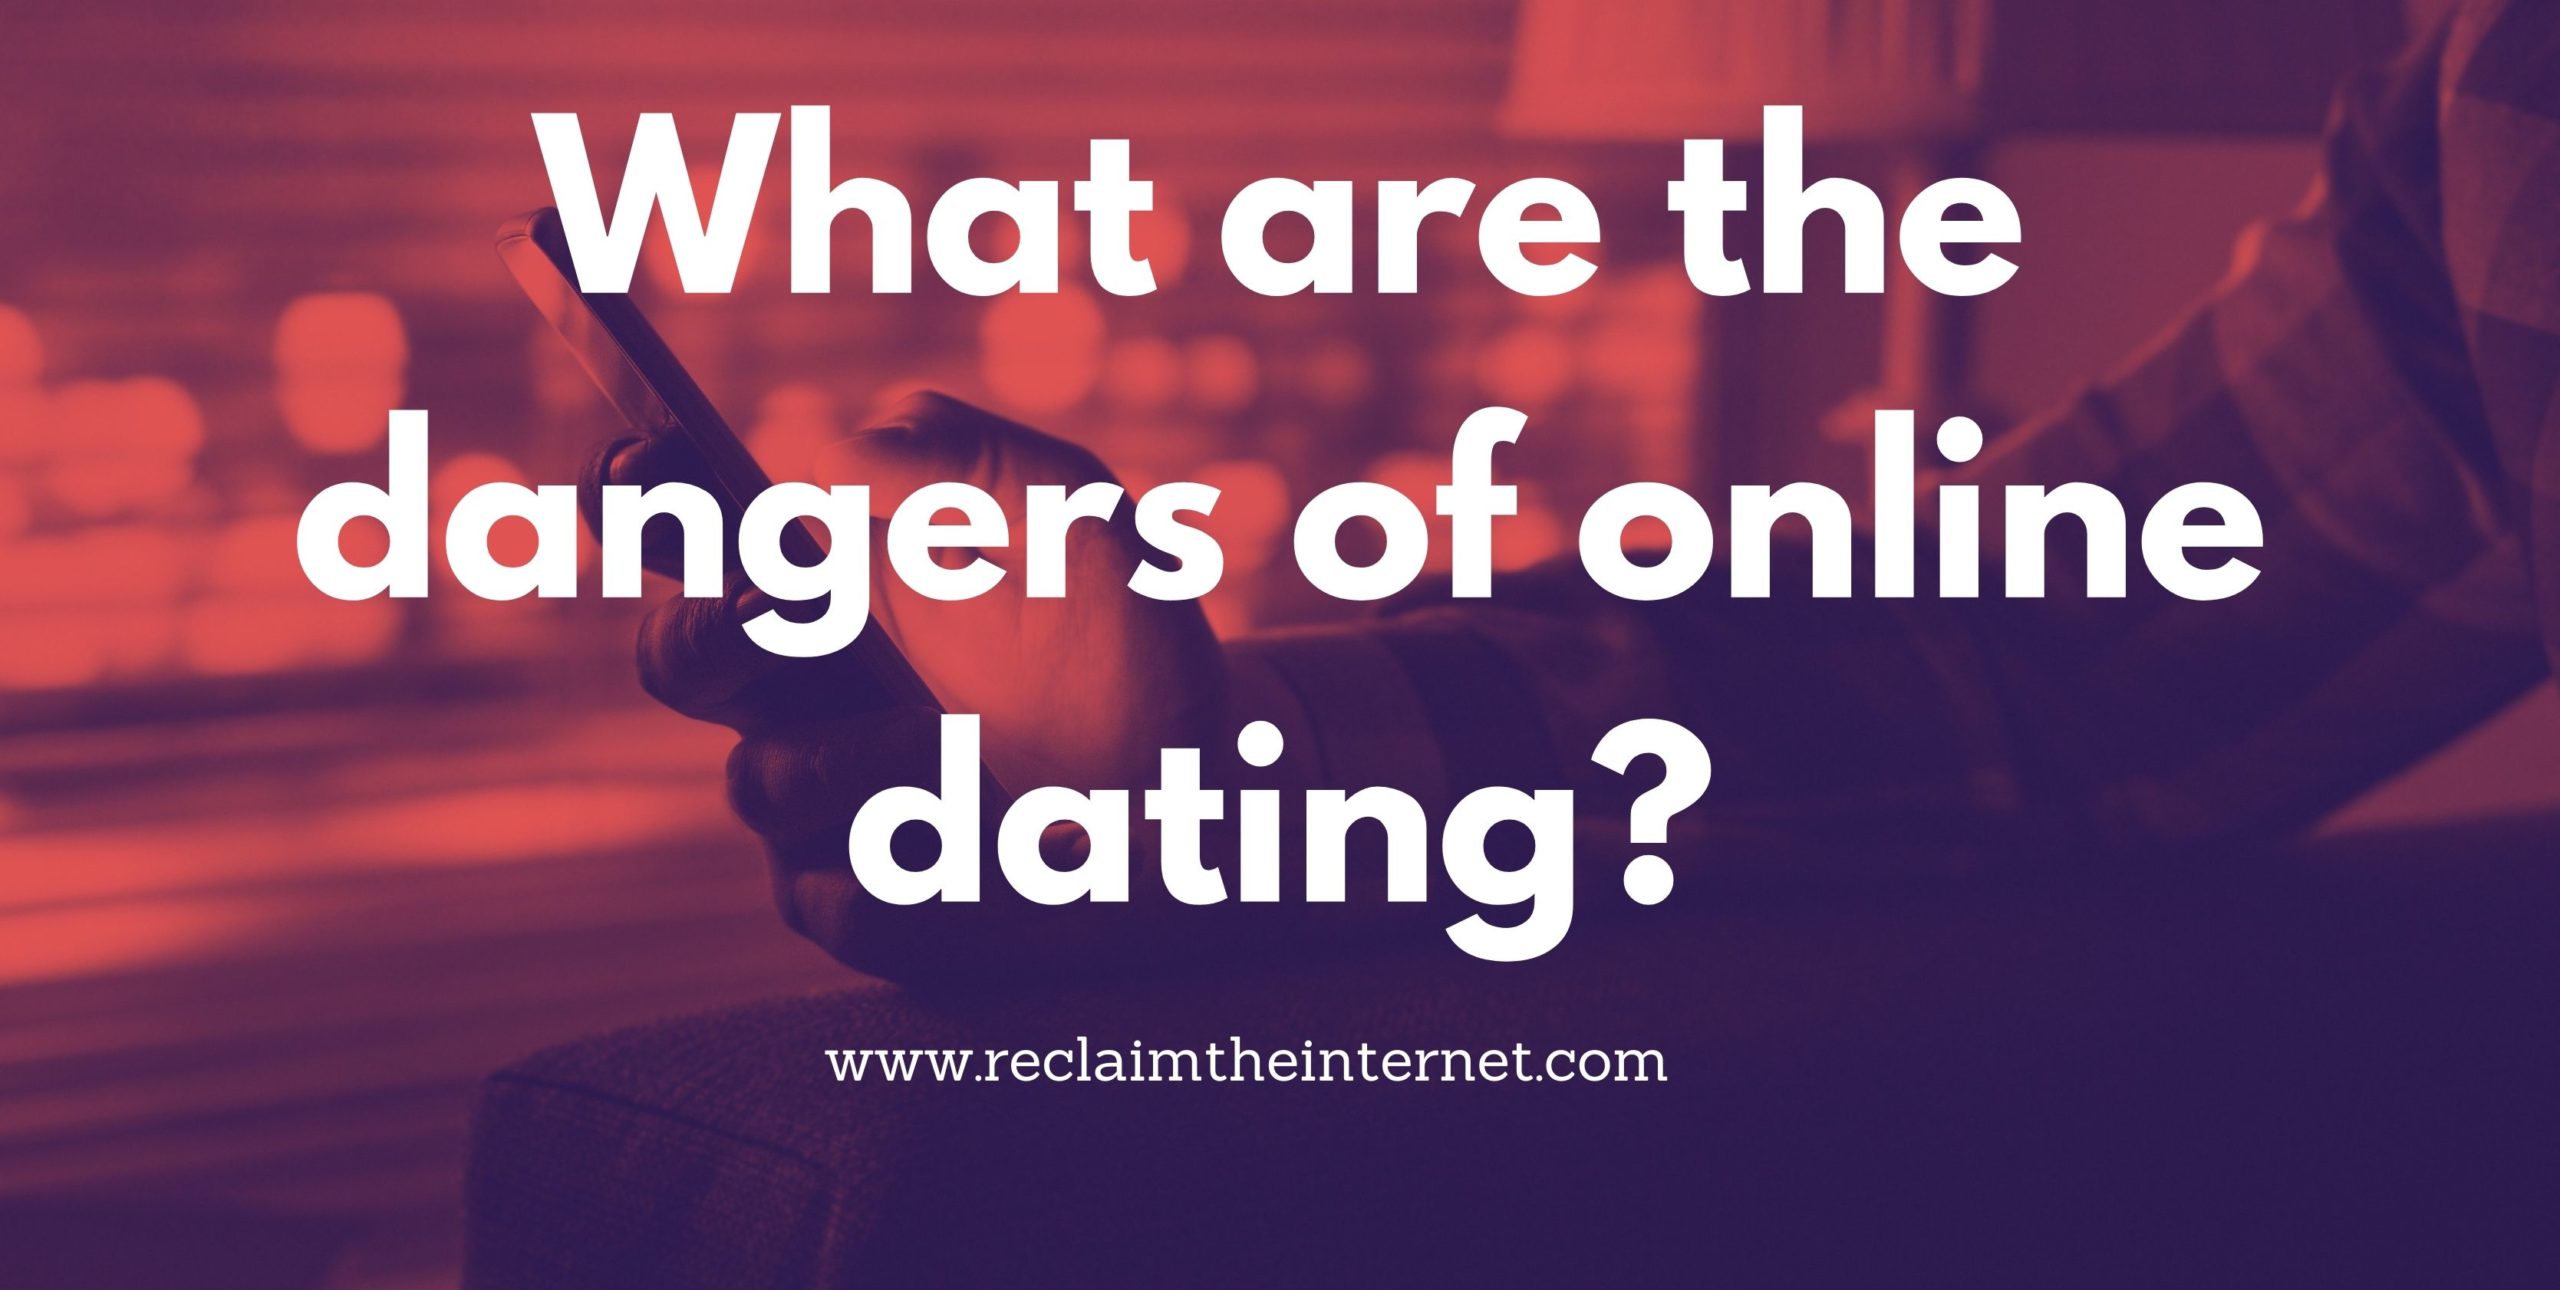 What are the dangers of online dating? - Reclaim The Internet